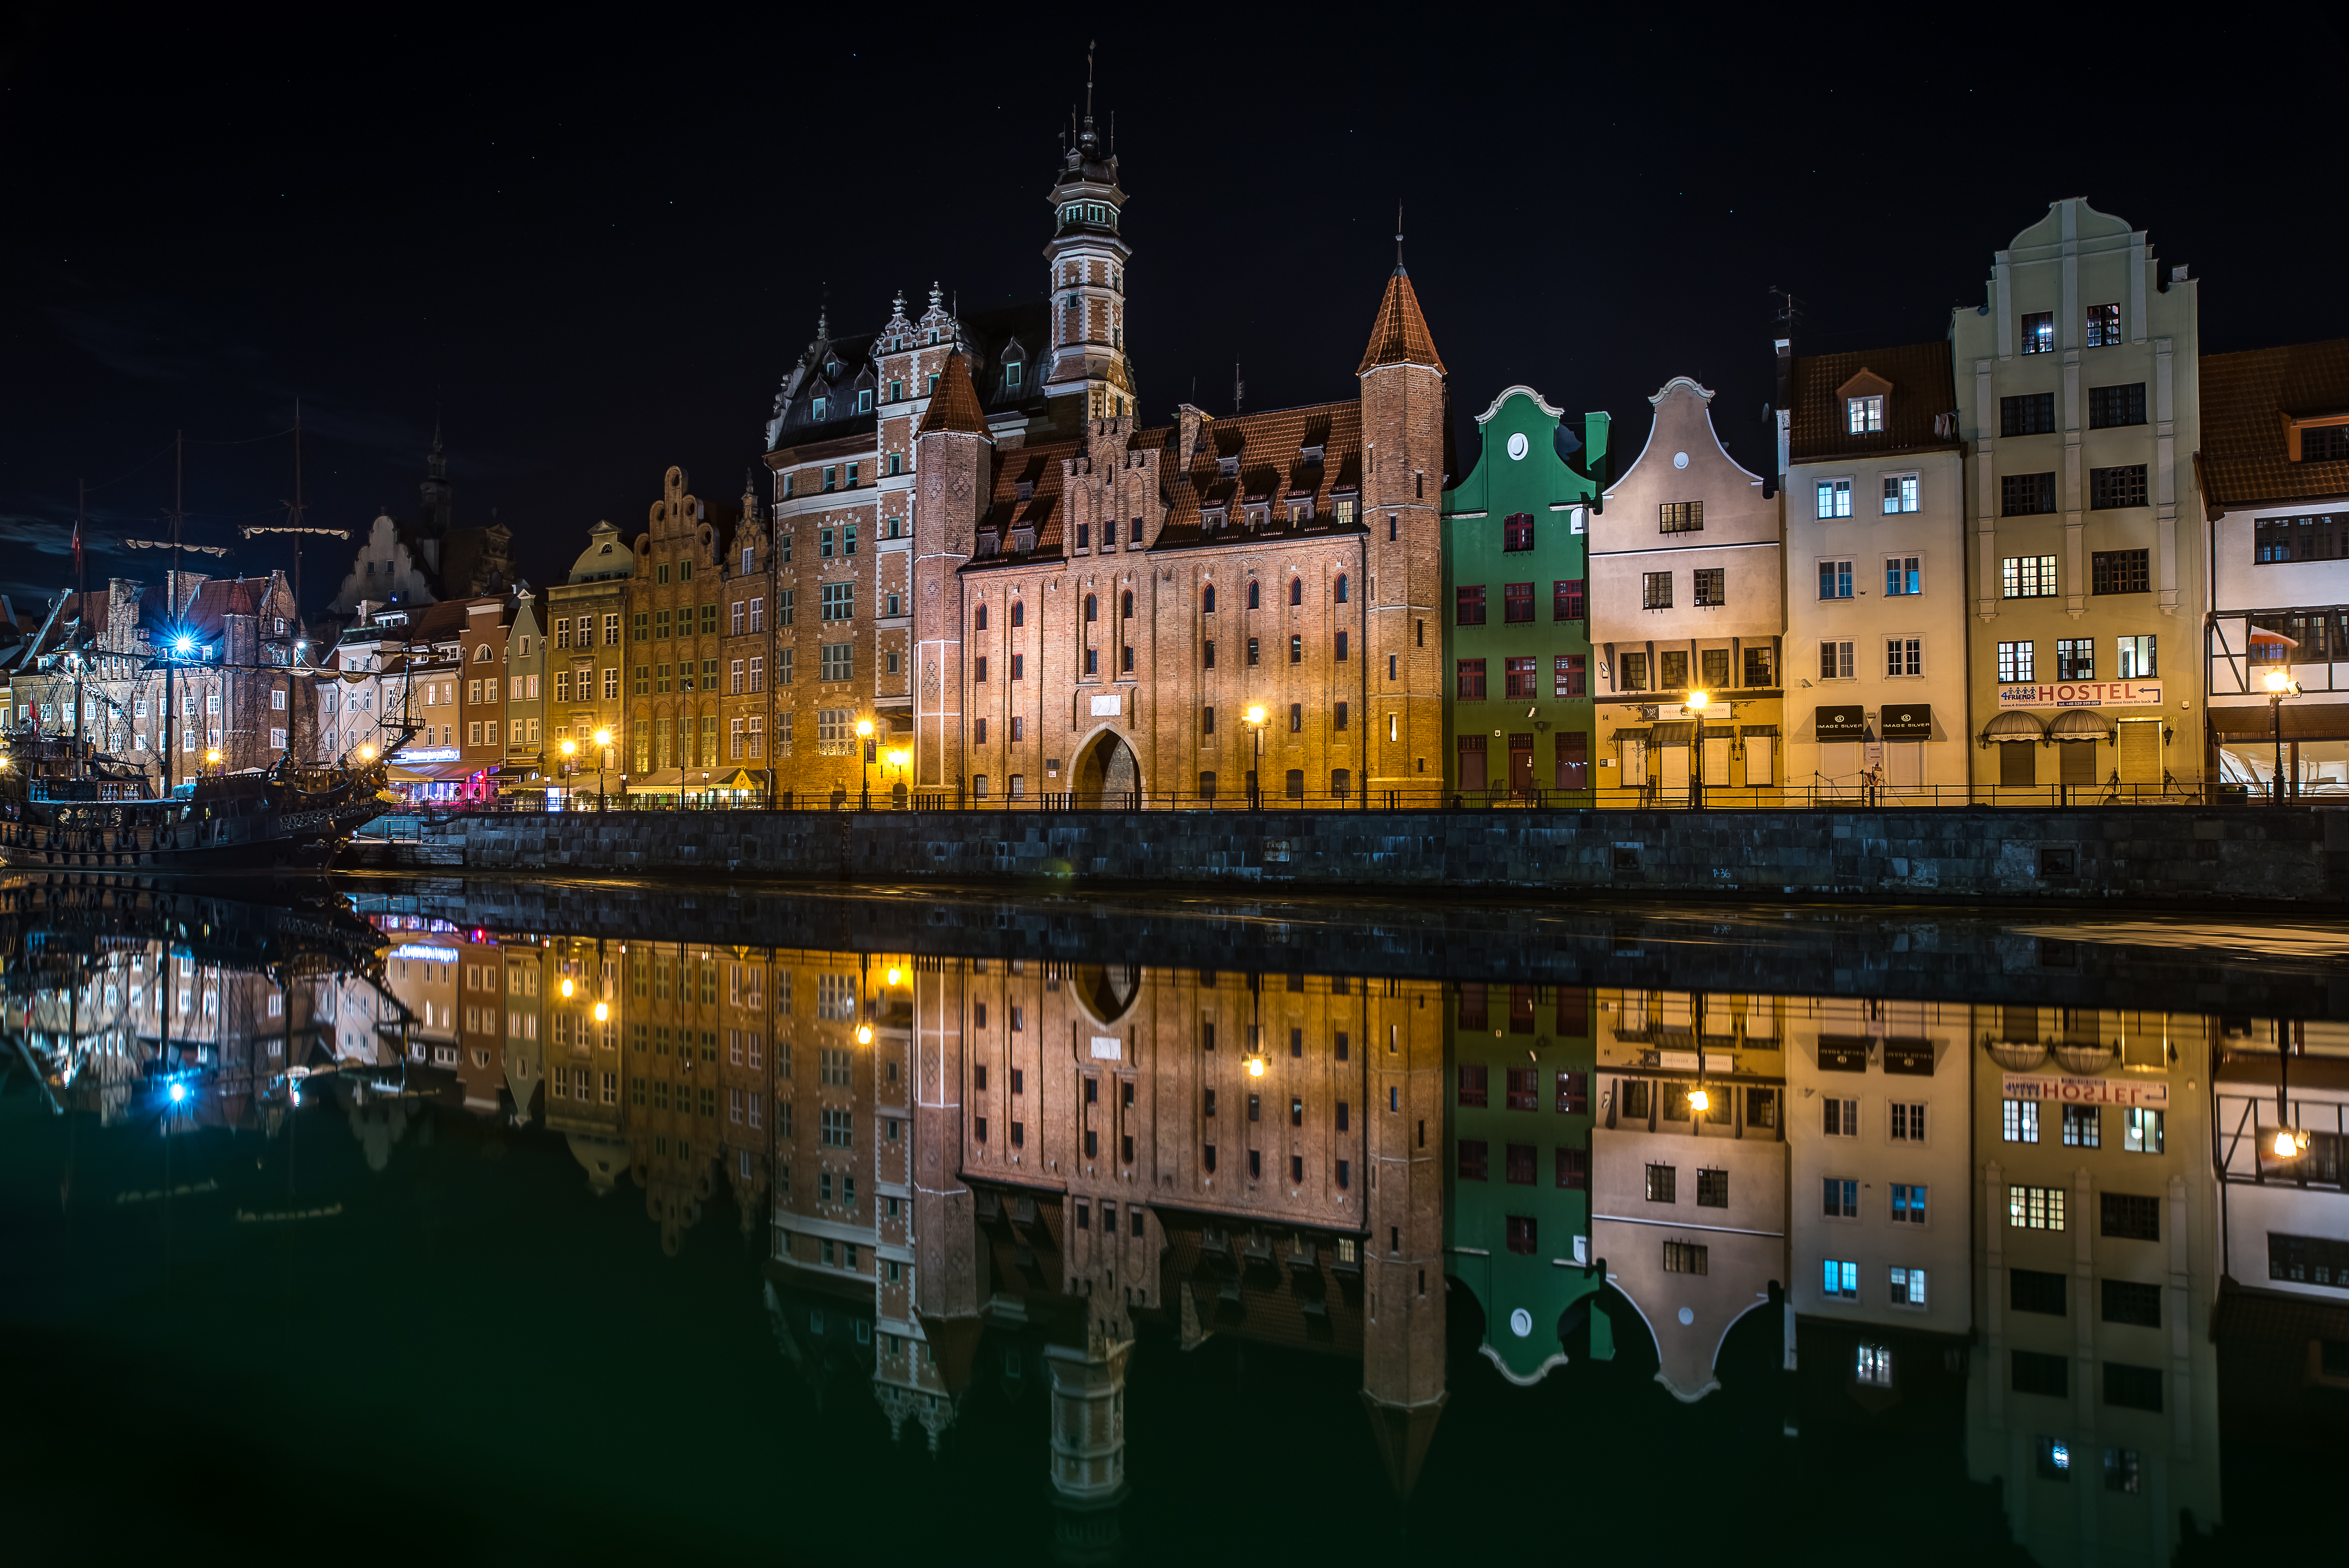 man made, gdansk, light, night, poland, reflection, river, town, towns